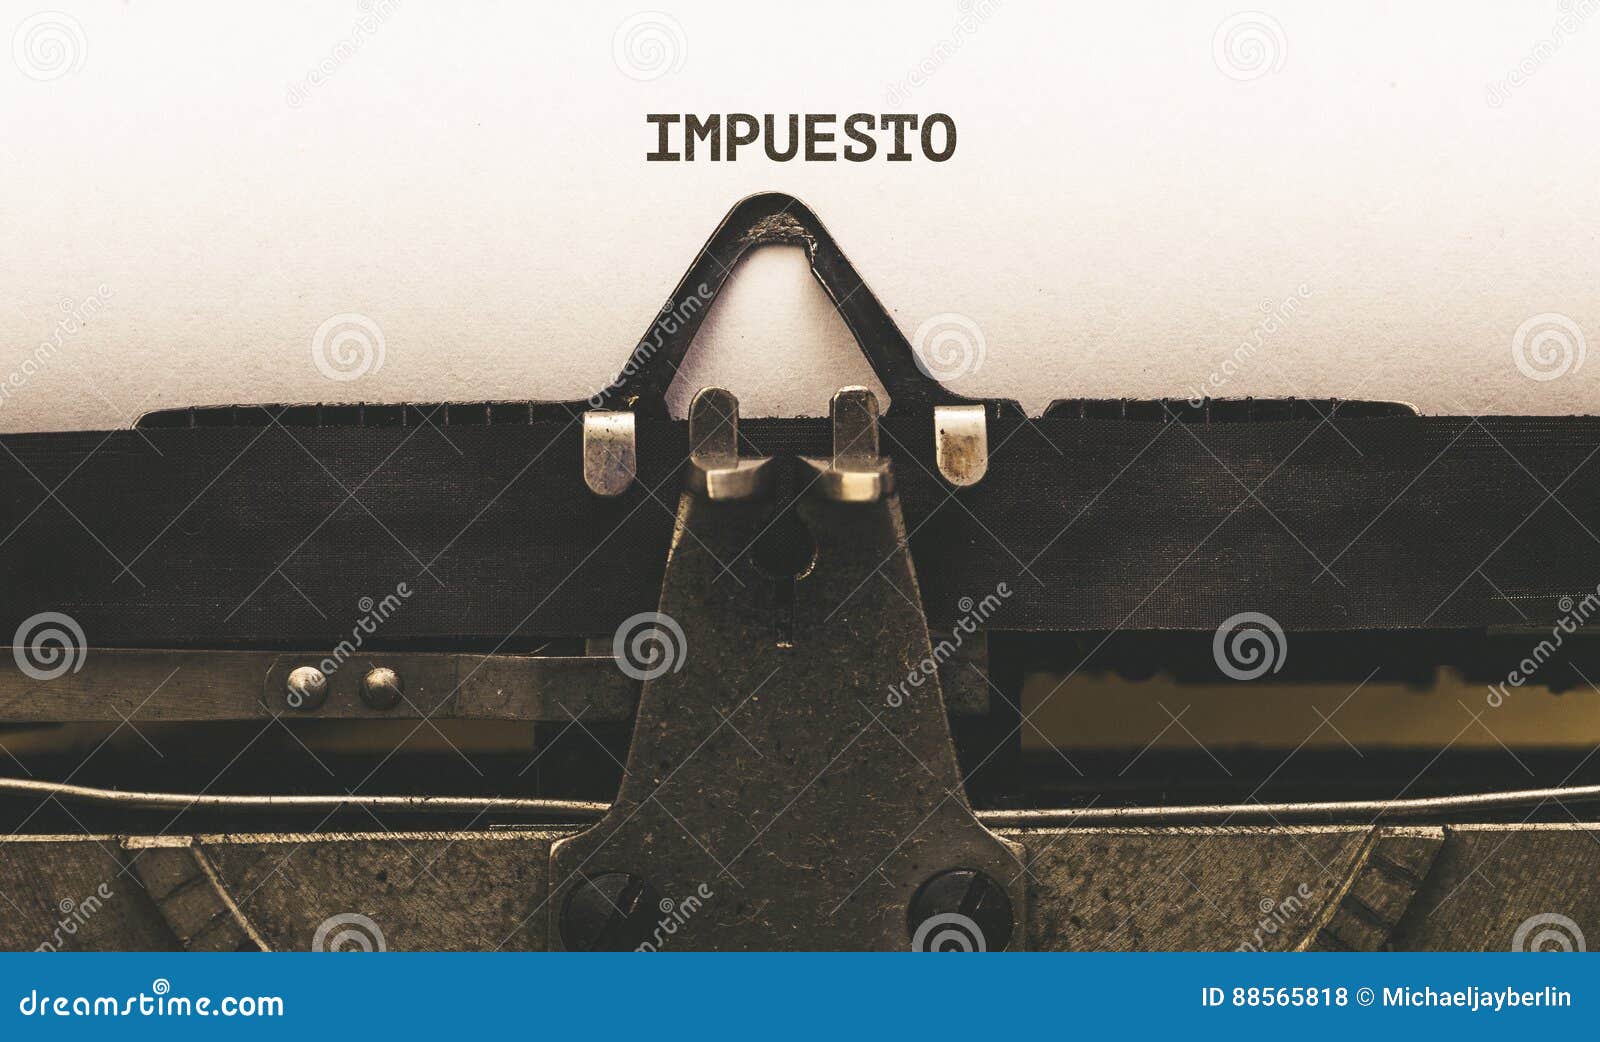 impuesto, spanish text for tax on vintage type writer from 1920s